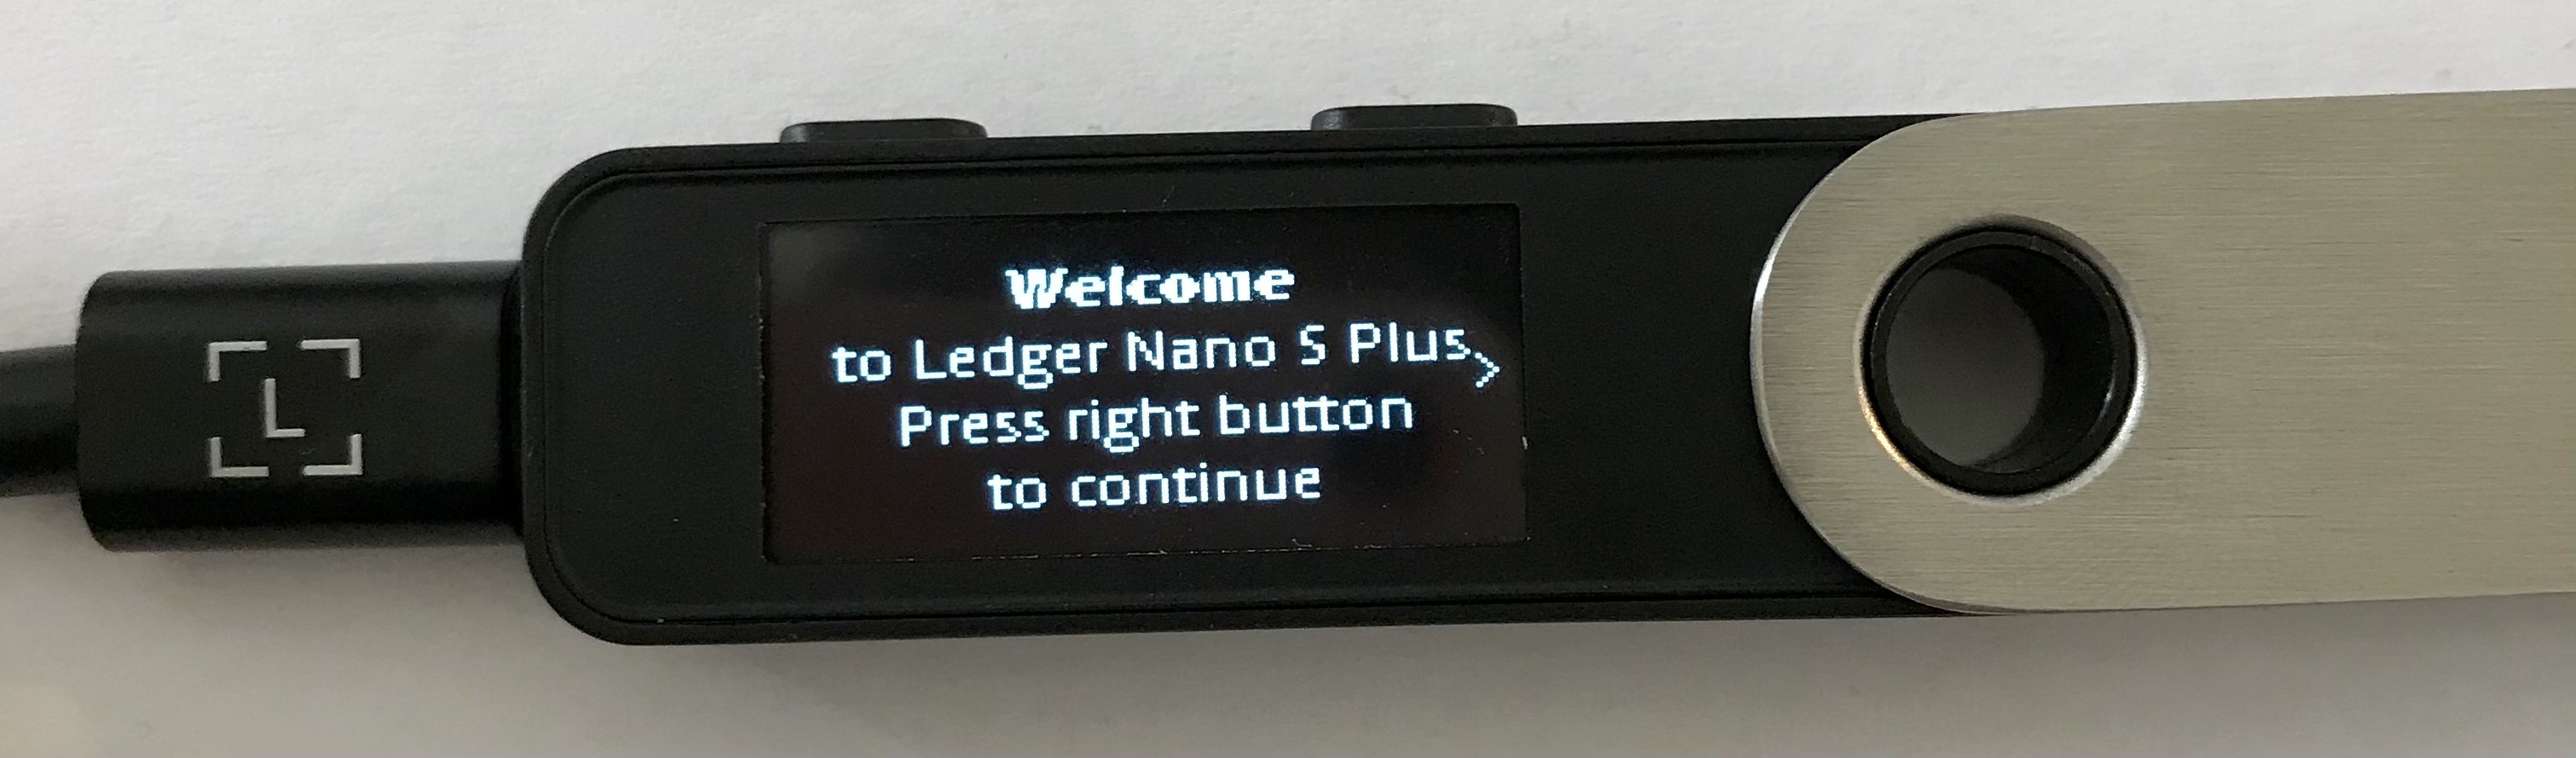 Why doesn't my Ledger Nano S turn on when plugged in? - AI Chat - Glarity